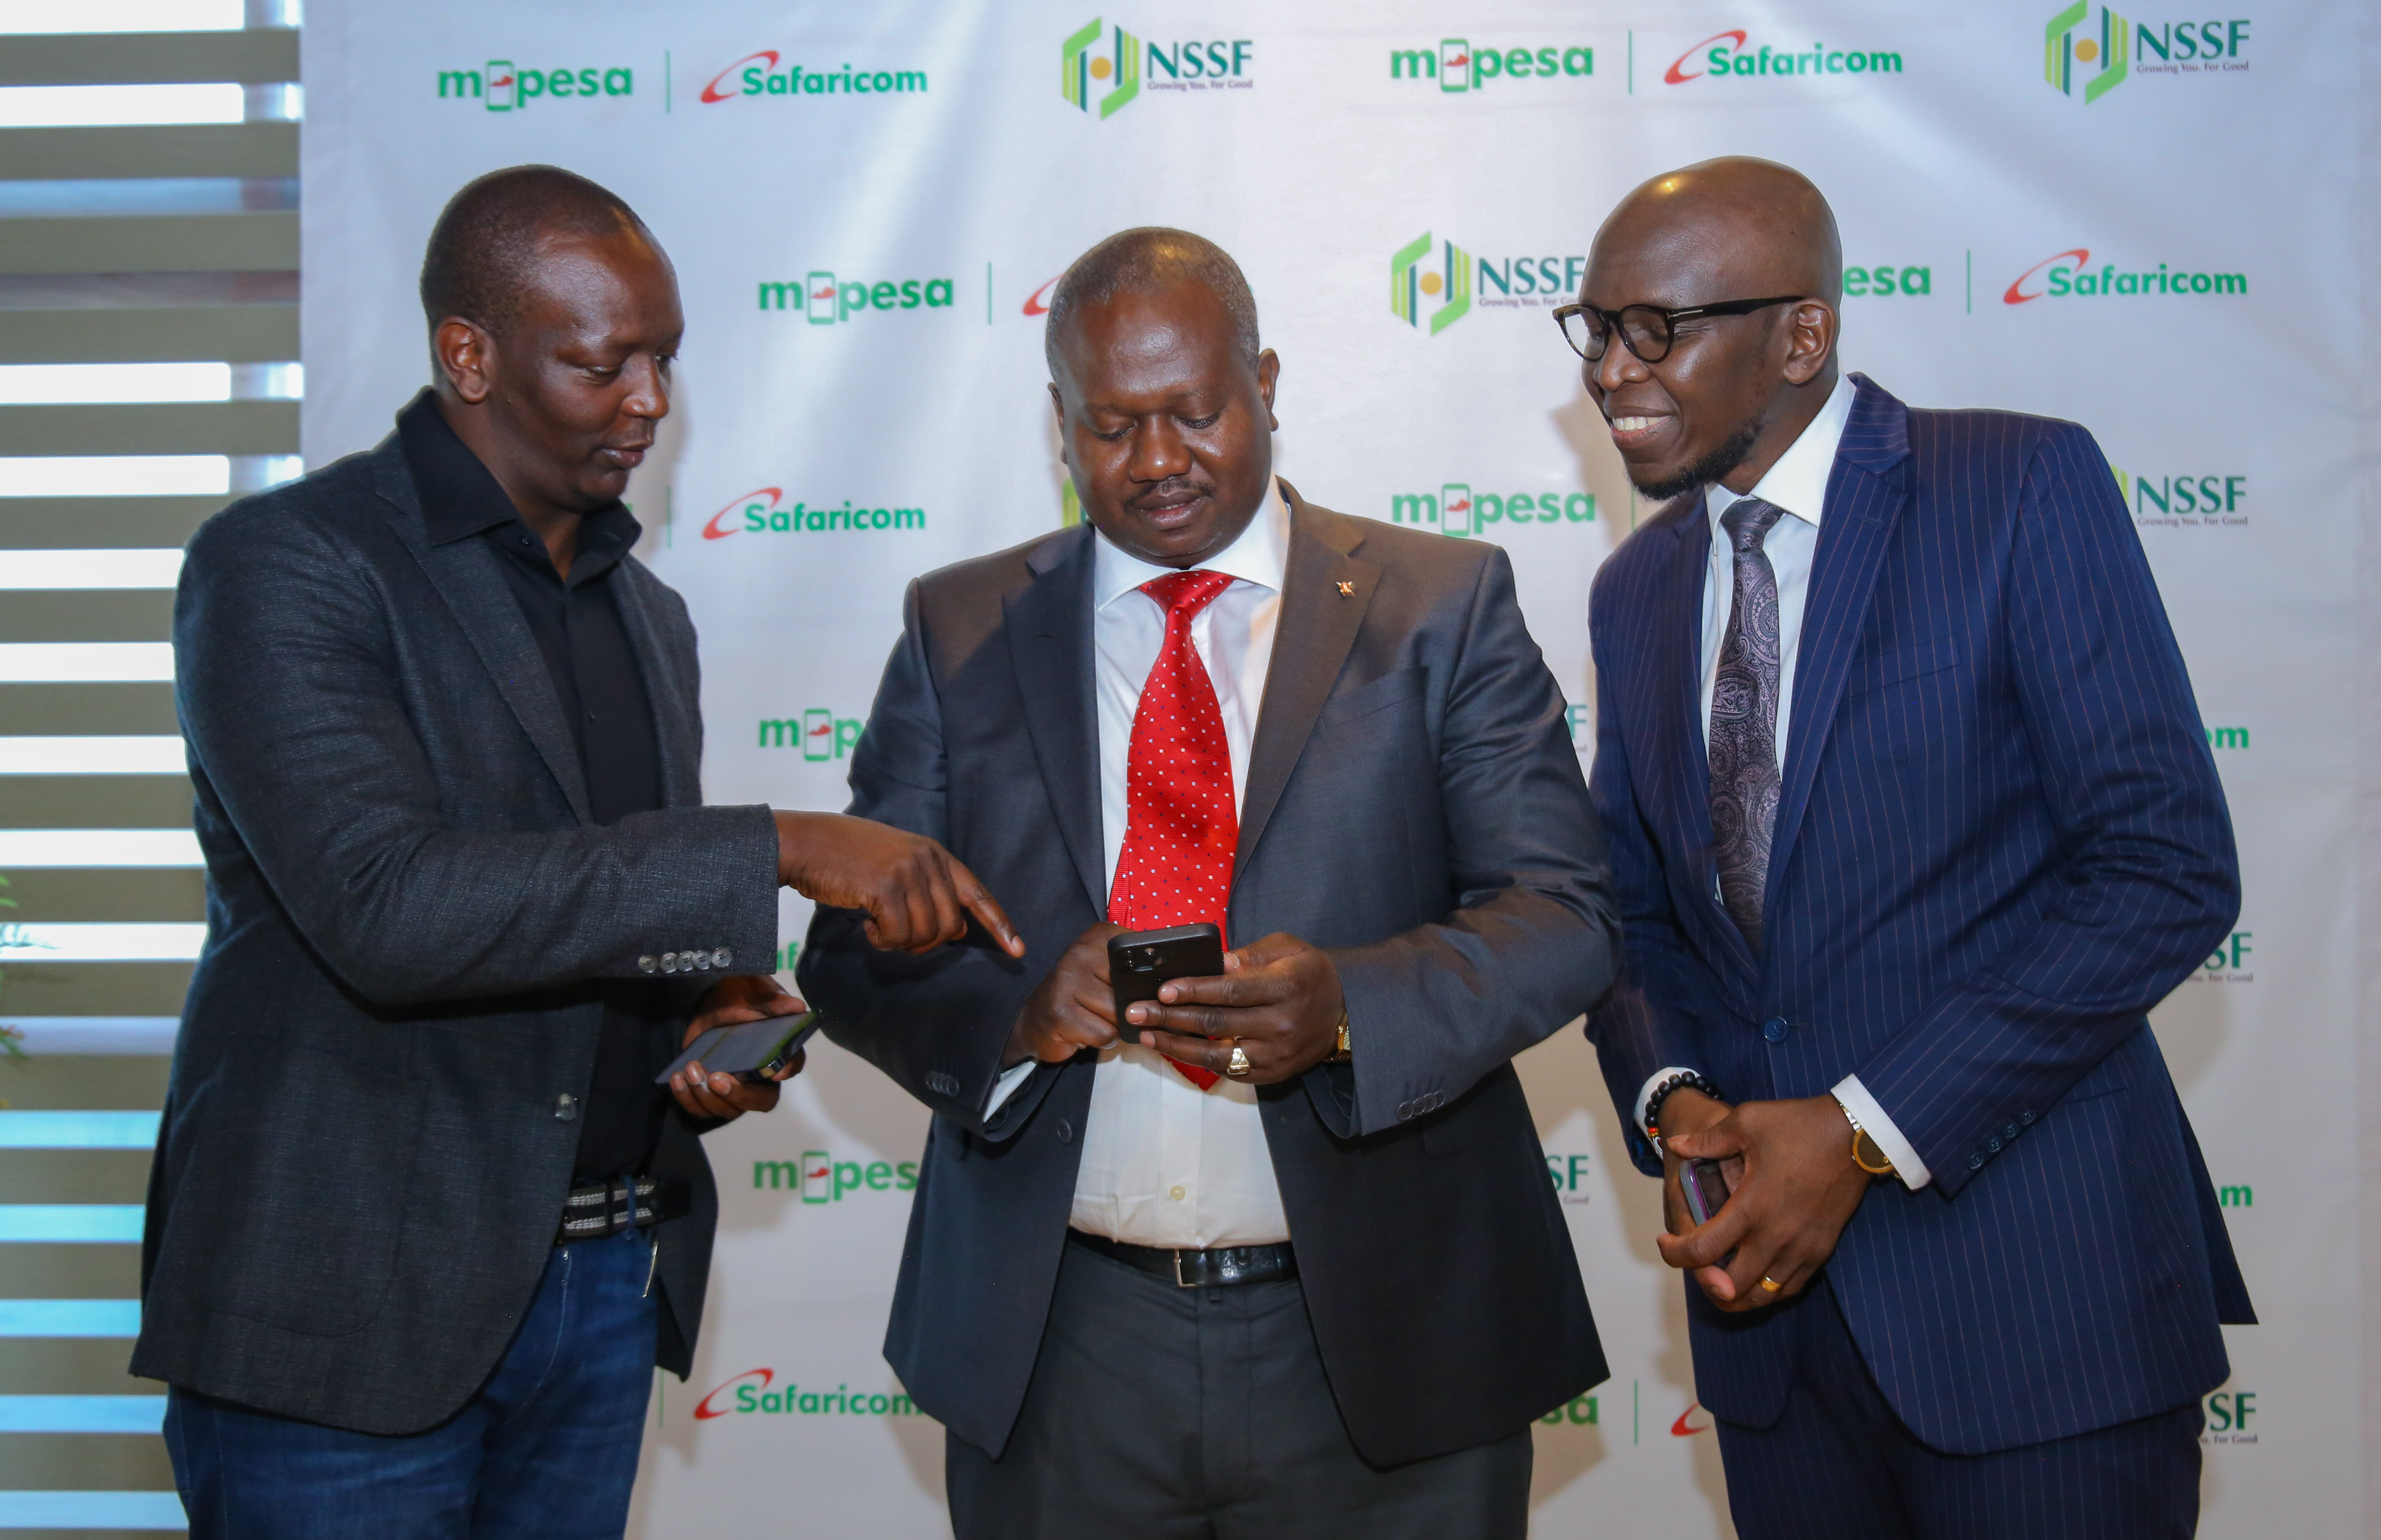 Safaricom and NSSF To Provide Pension Services Through M-PESA Mini App